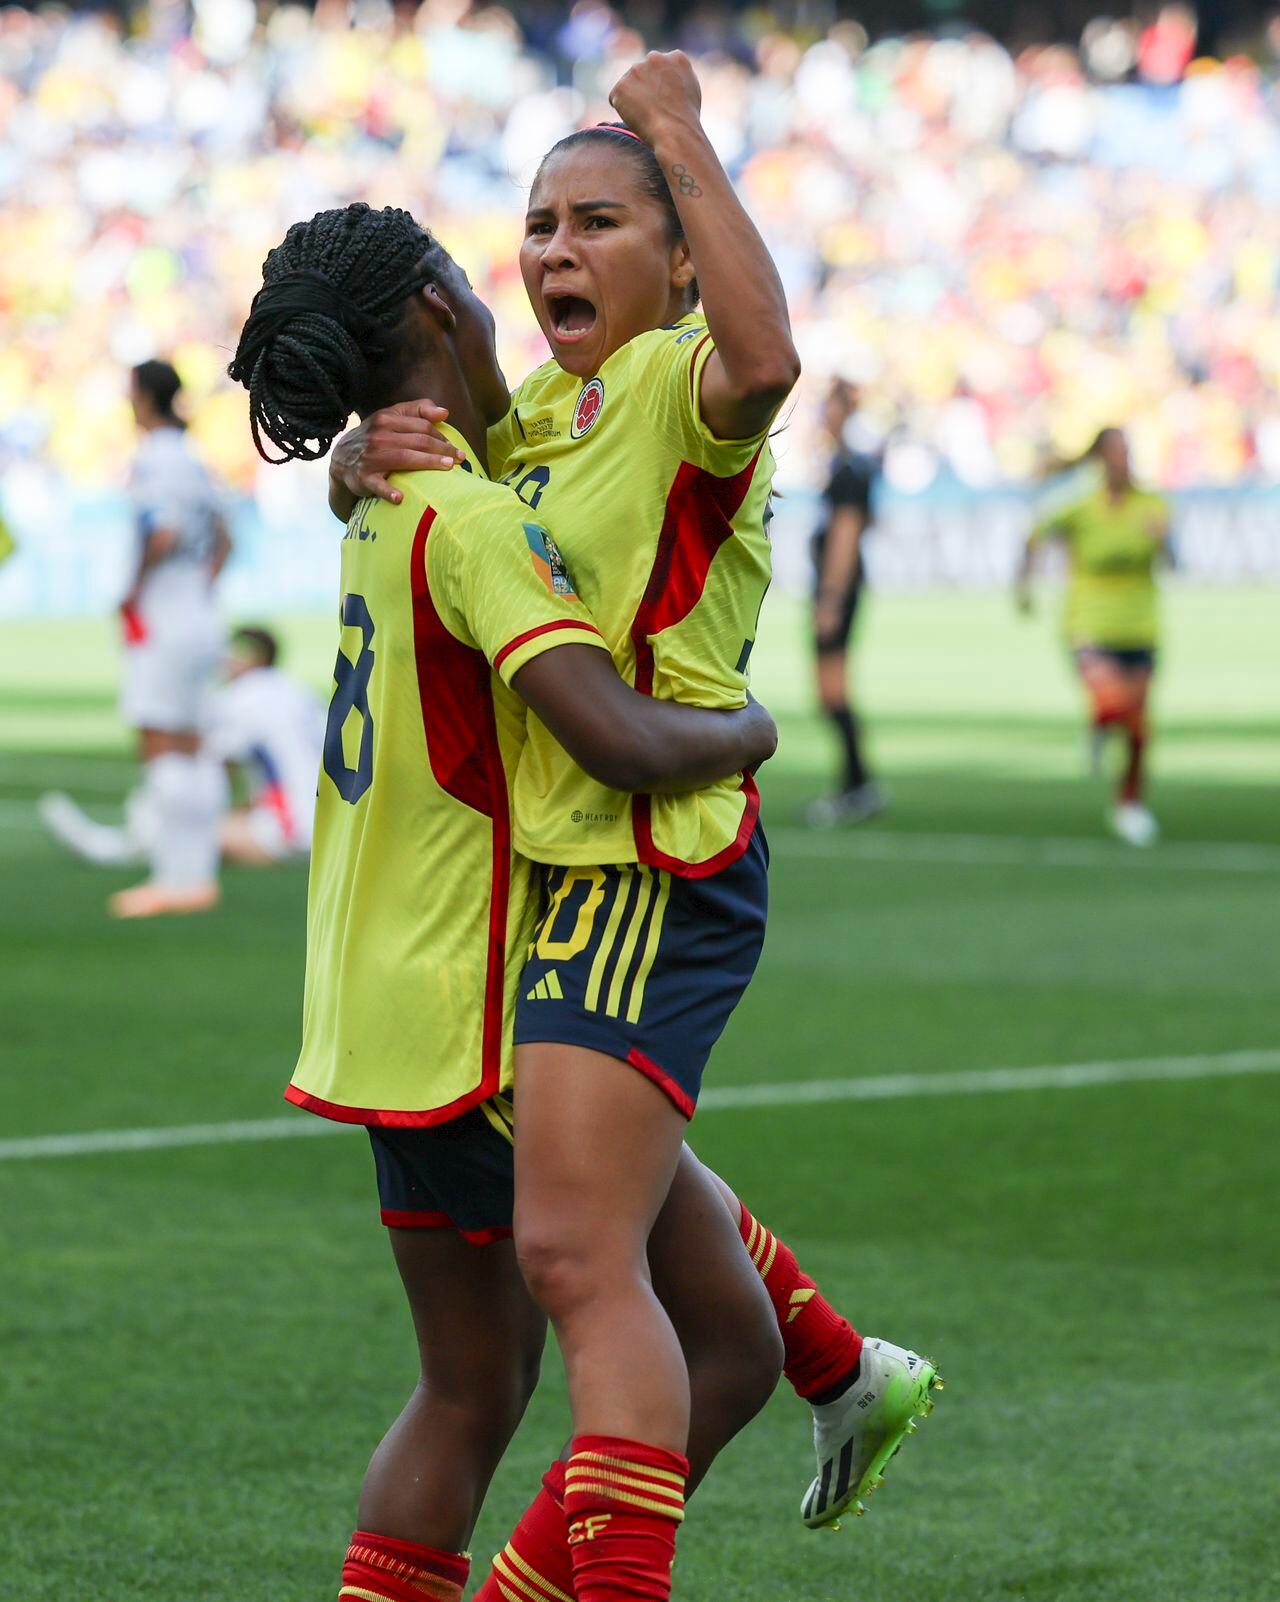 Colombia's Linda Caicedo celebrates with teammate Leicy Santos after Caicedo scored her first goal during the Women's World Cup Group H soccer match between Colombia and South Korea at Sydney Football Stadium in Sydney, Australia, Tuesday, July 25, 2023. (AP Photo/Sophie Ralph)